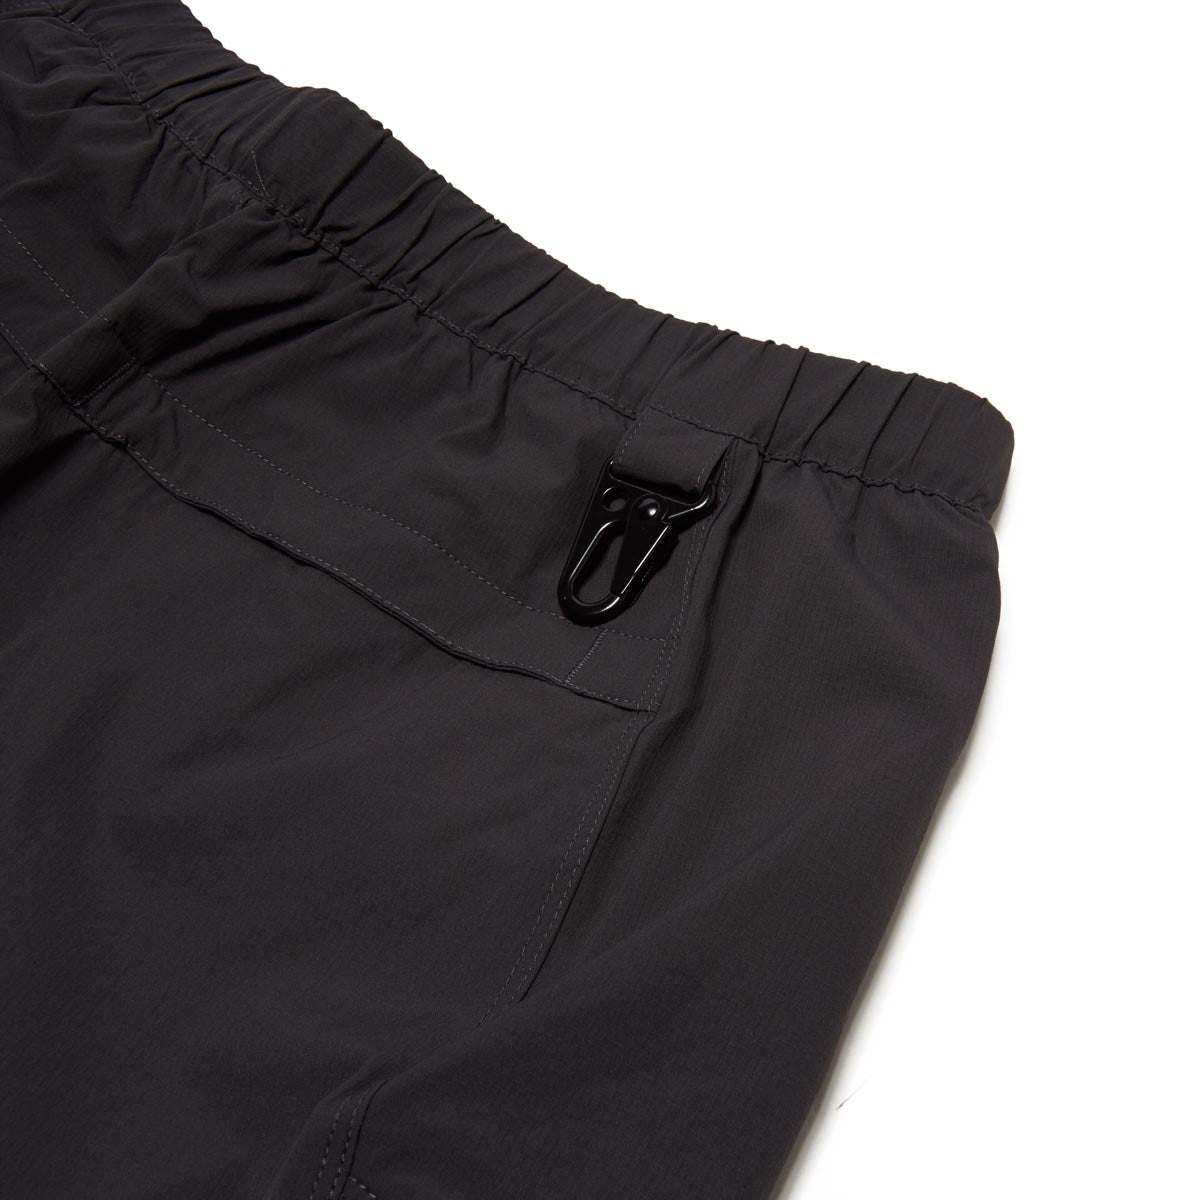 Kennedy The Ascension Cargo Pants - Charcoal image 4